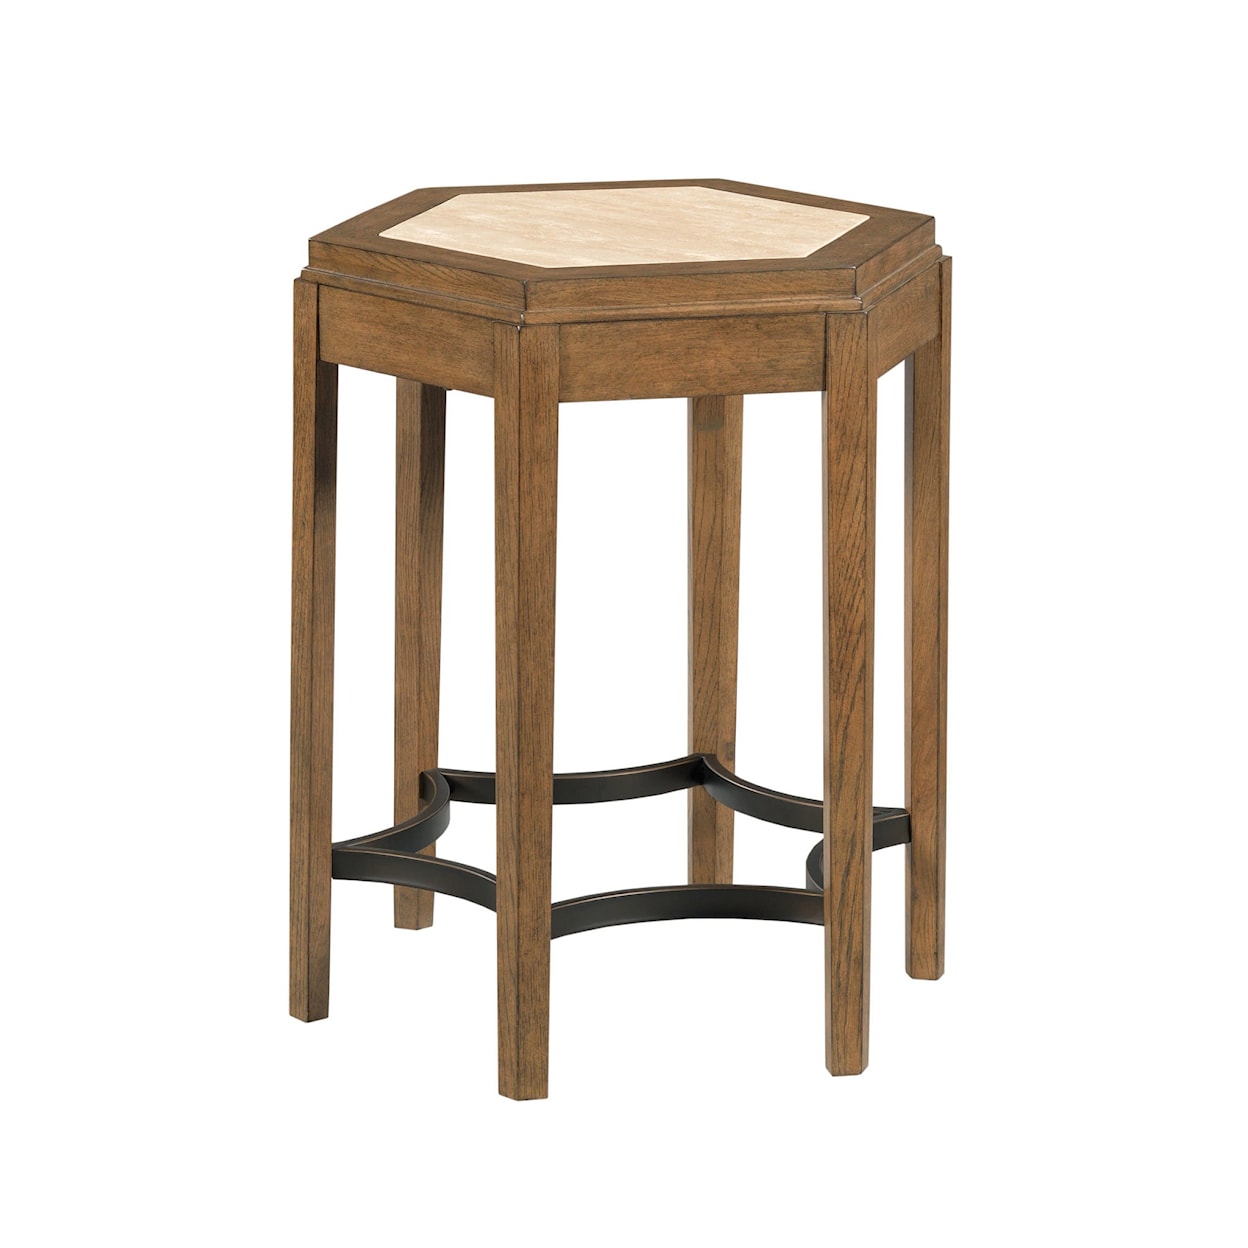 Kincaid Furniture Brookside-Acquisitions Chairside Table